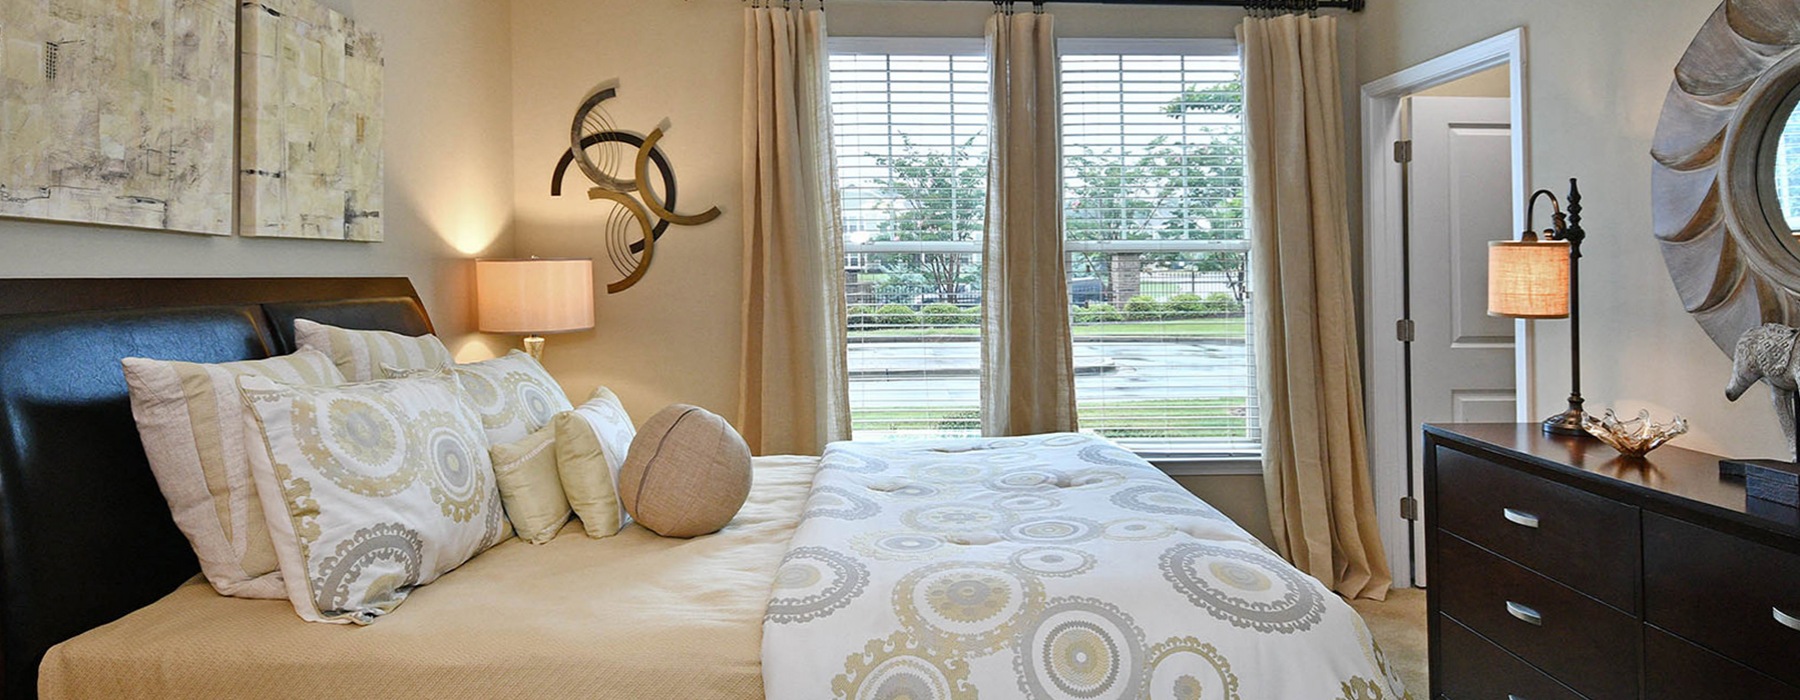 Large bedroom with large window for plenty of natural lighting at The Vinings at Laurel Creek Apartments